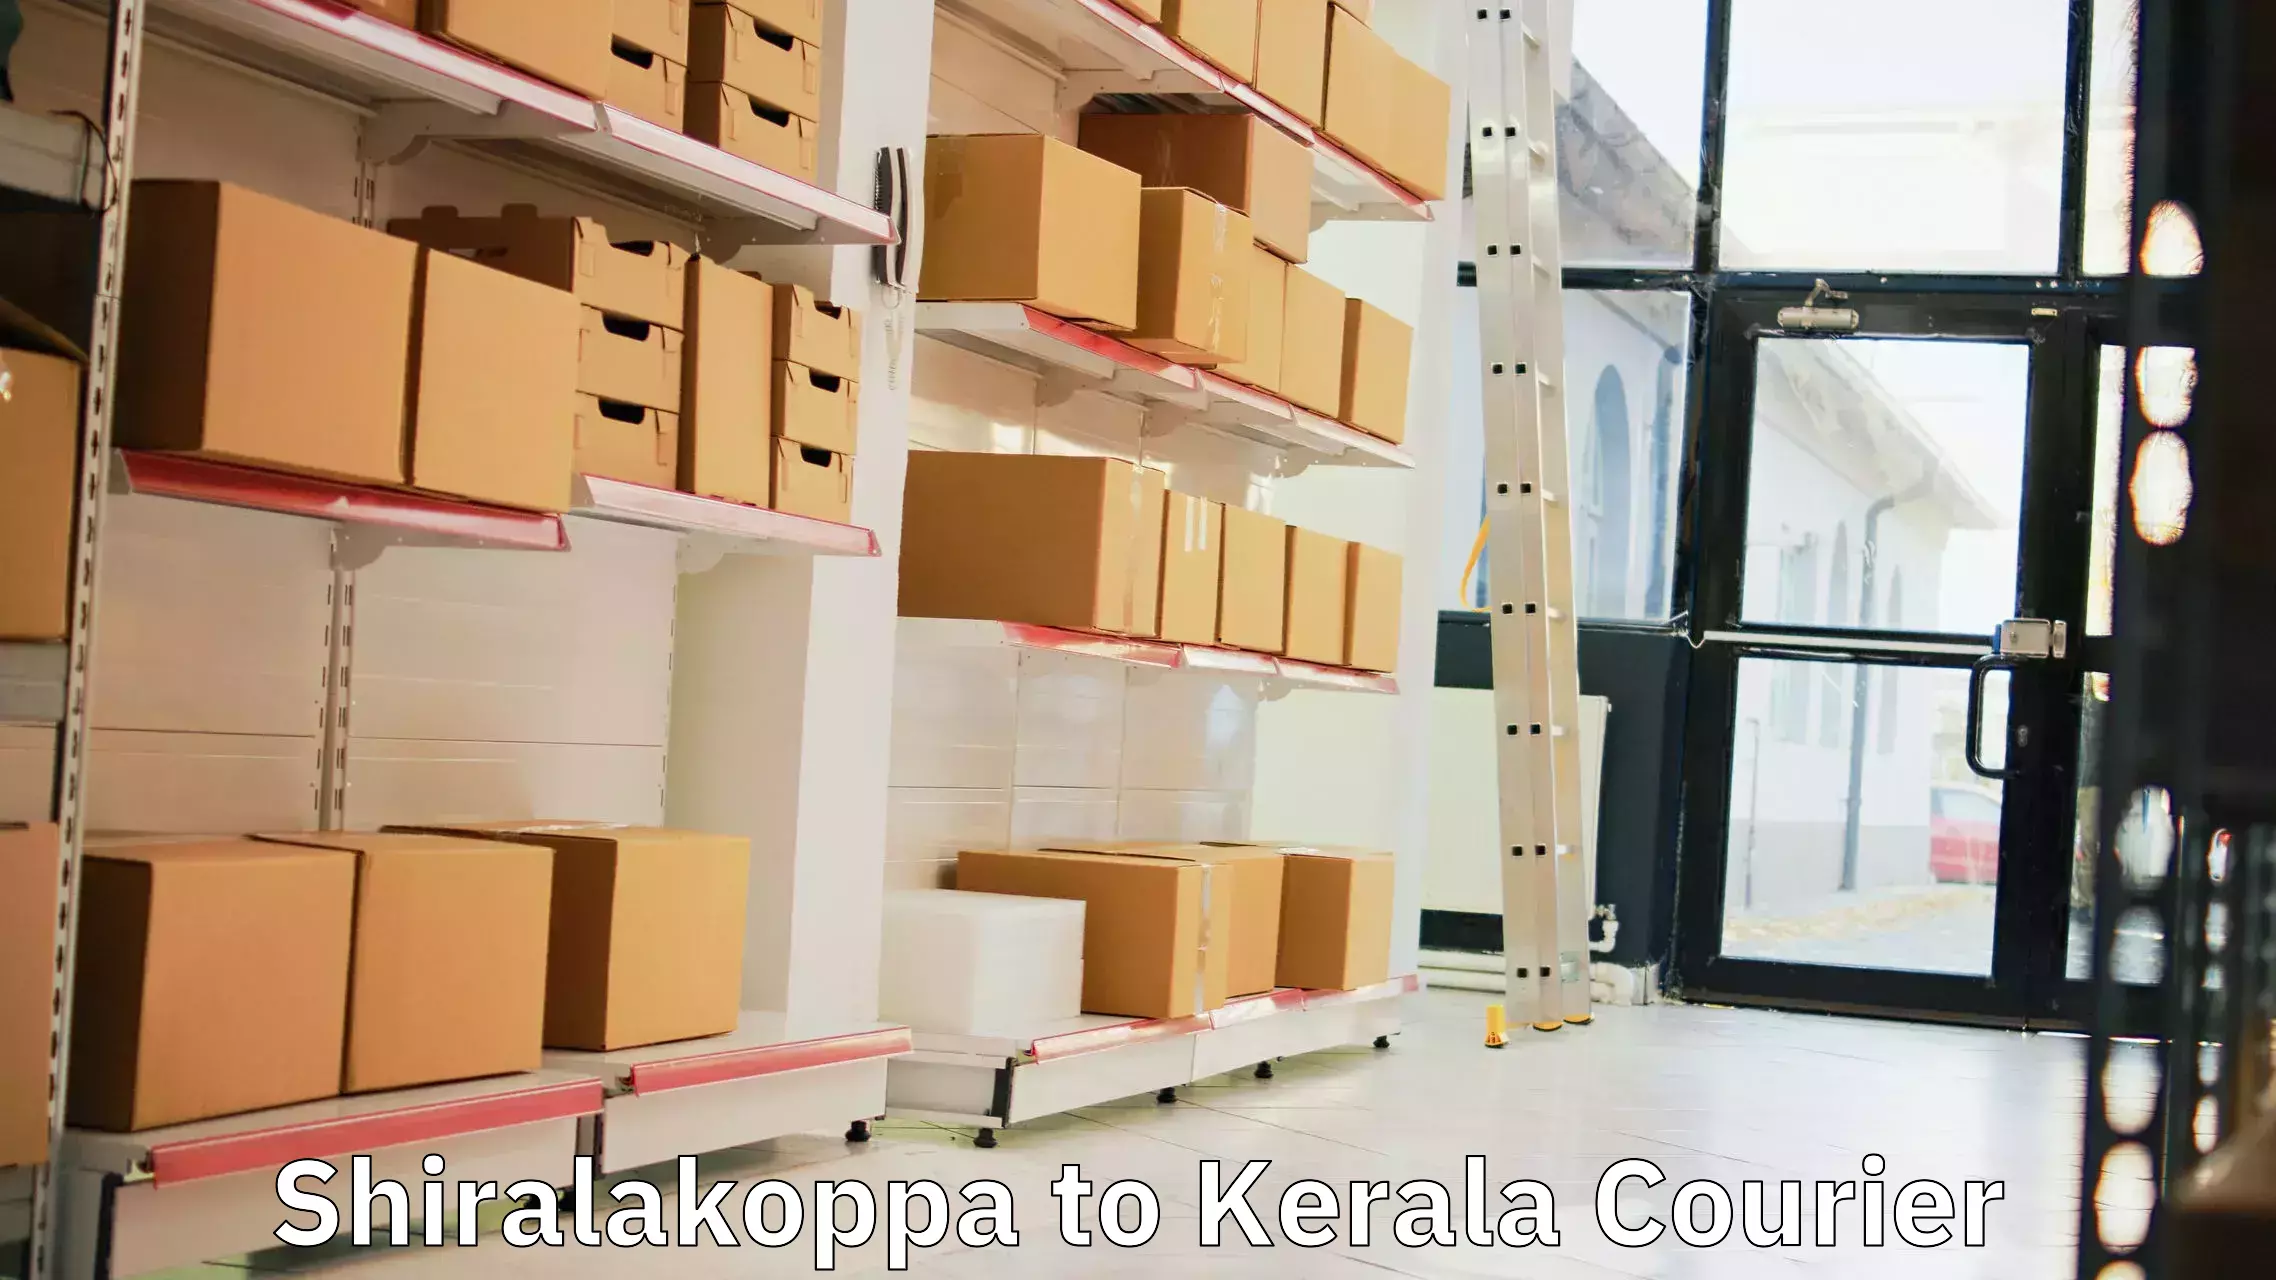 Ocean freight courier Shiralakoppa to Parappa